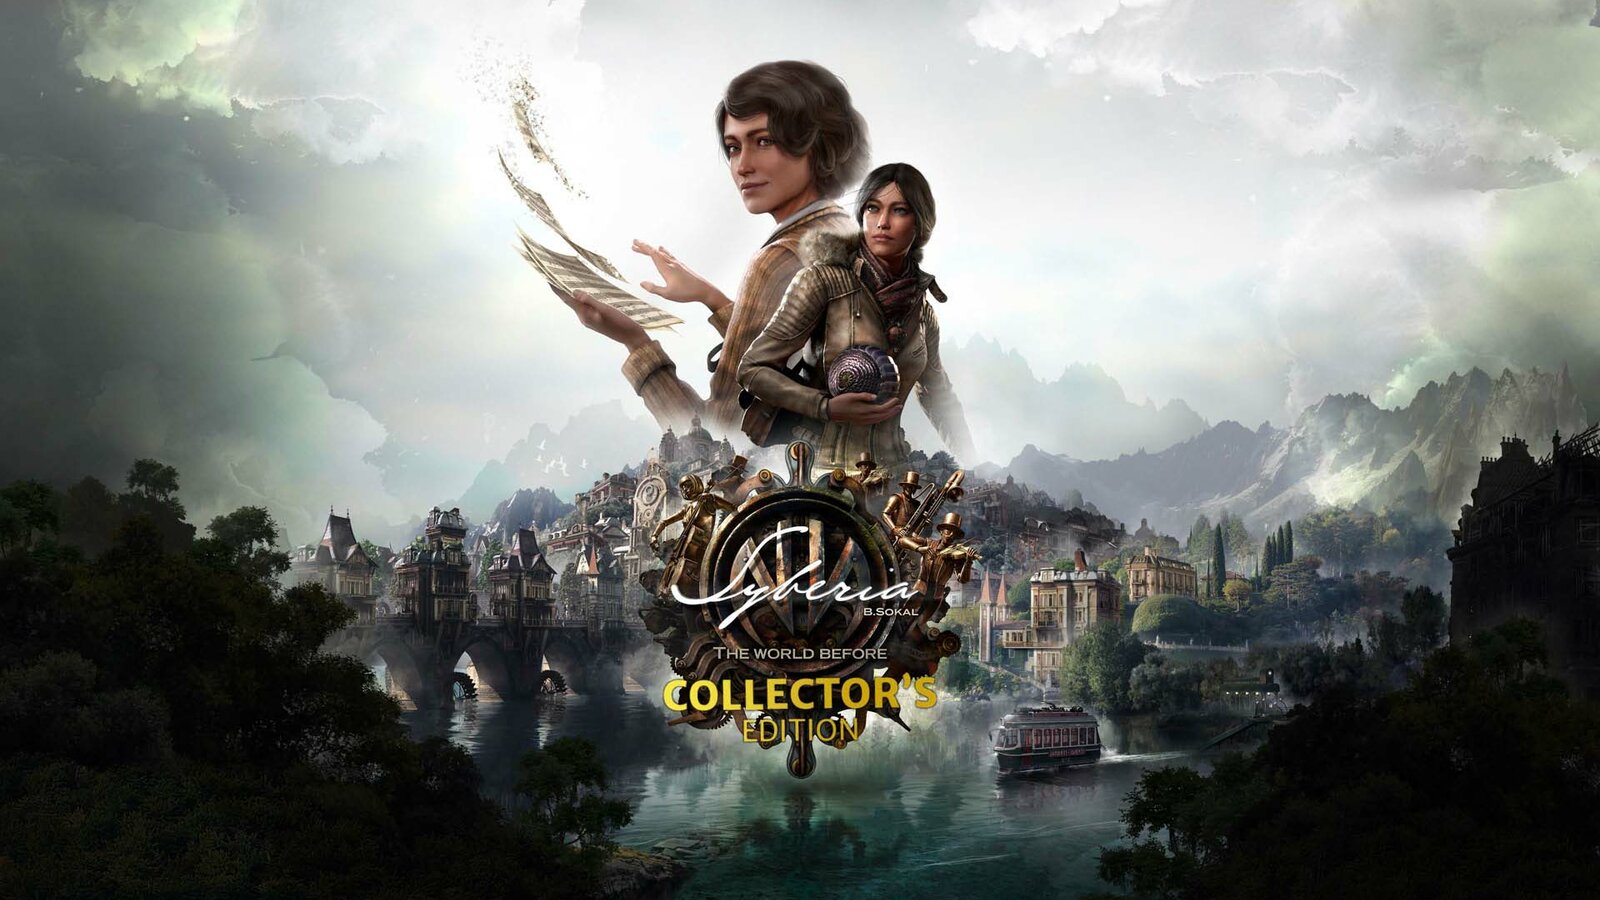 Syberia: The World Before - Collector’s Edition